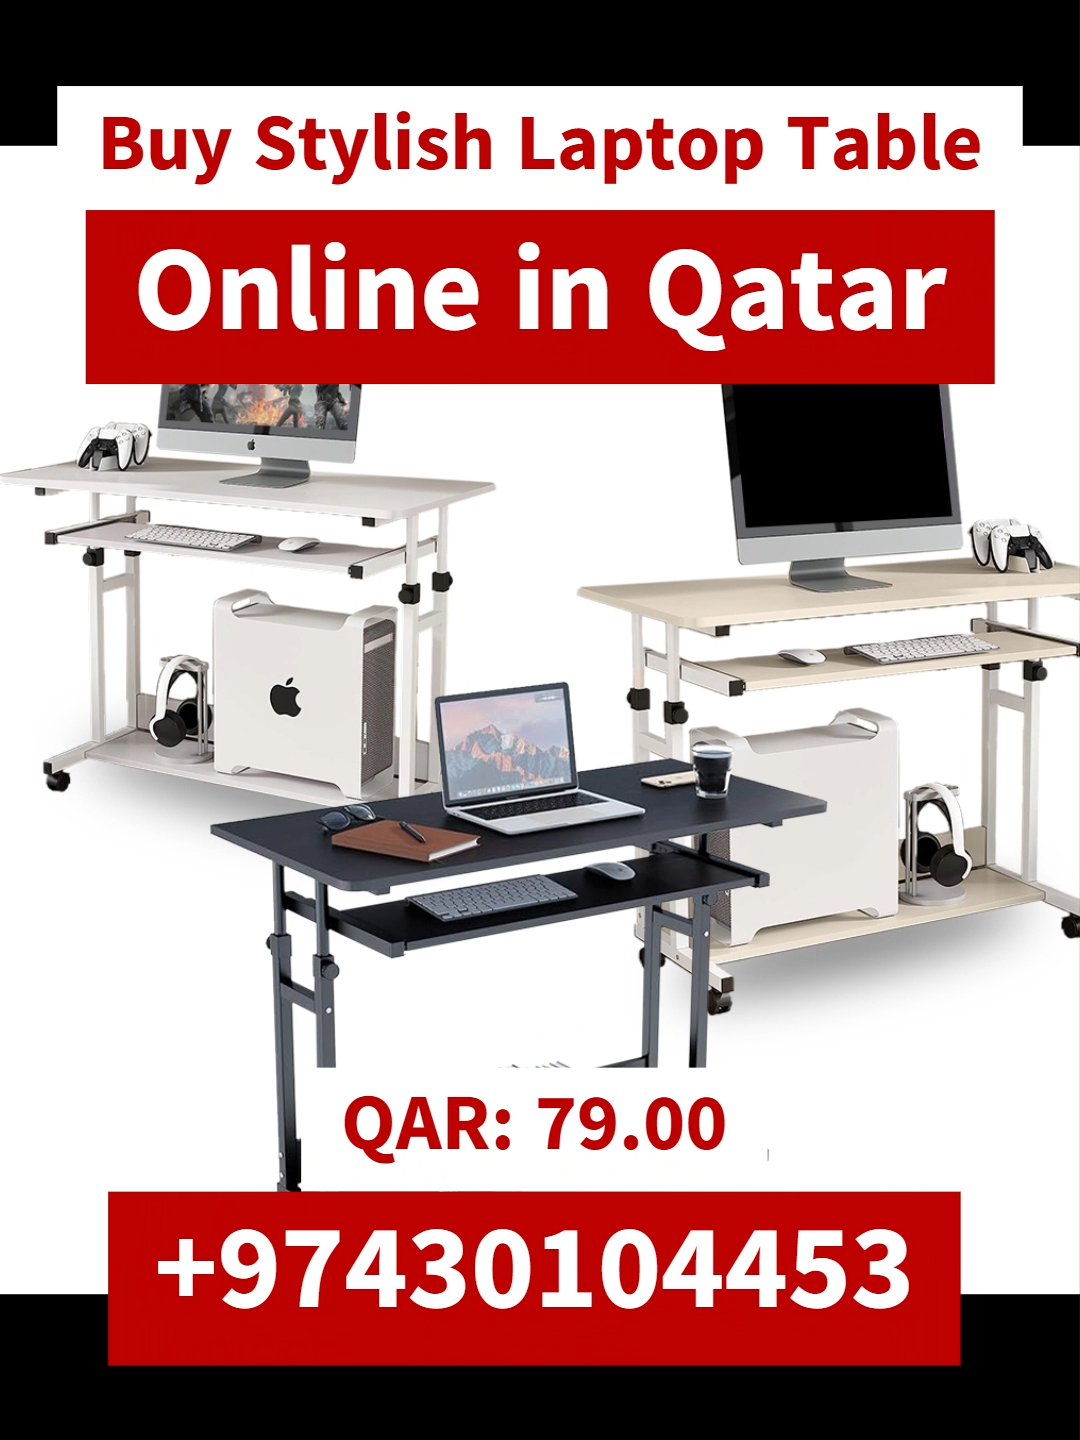 Buy Stylish Laptop Table Online in Qatar @yaqeen.trading  Elevate your workspace with our stylish and functional laptop table, now available online in Qatar! Perfect for home or office use, this versatile table is lightweight, portable, and designed to enhance your productivity and comfort. Get yours today for just QAR 79. To order, call or WhatsApp +97430104453. Buy Now: https://yaqeentrading.com/buy-stylish-laptop-table-online-in-qatar/ #laptoptable #qatar #workfromhome #homeoffice #deals #onlineshopping #doha #accessories #workspaceupgrade #portabledesk #sale #buynow